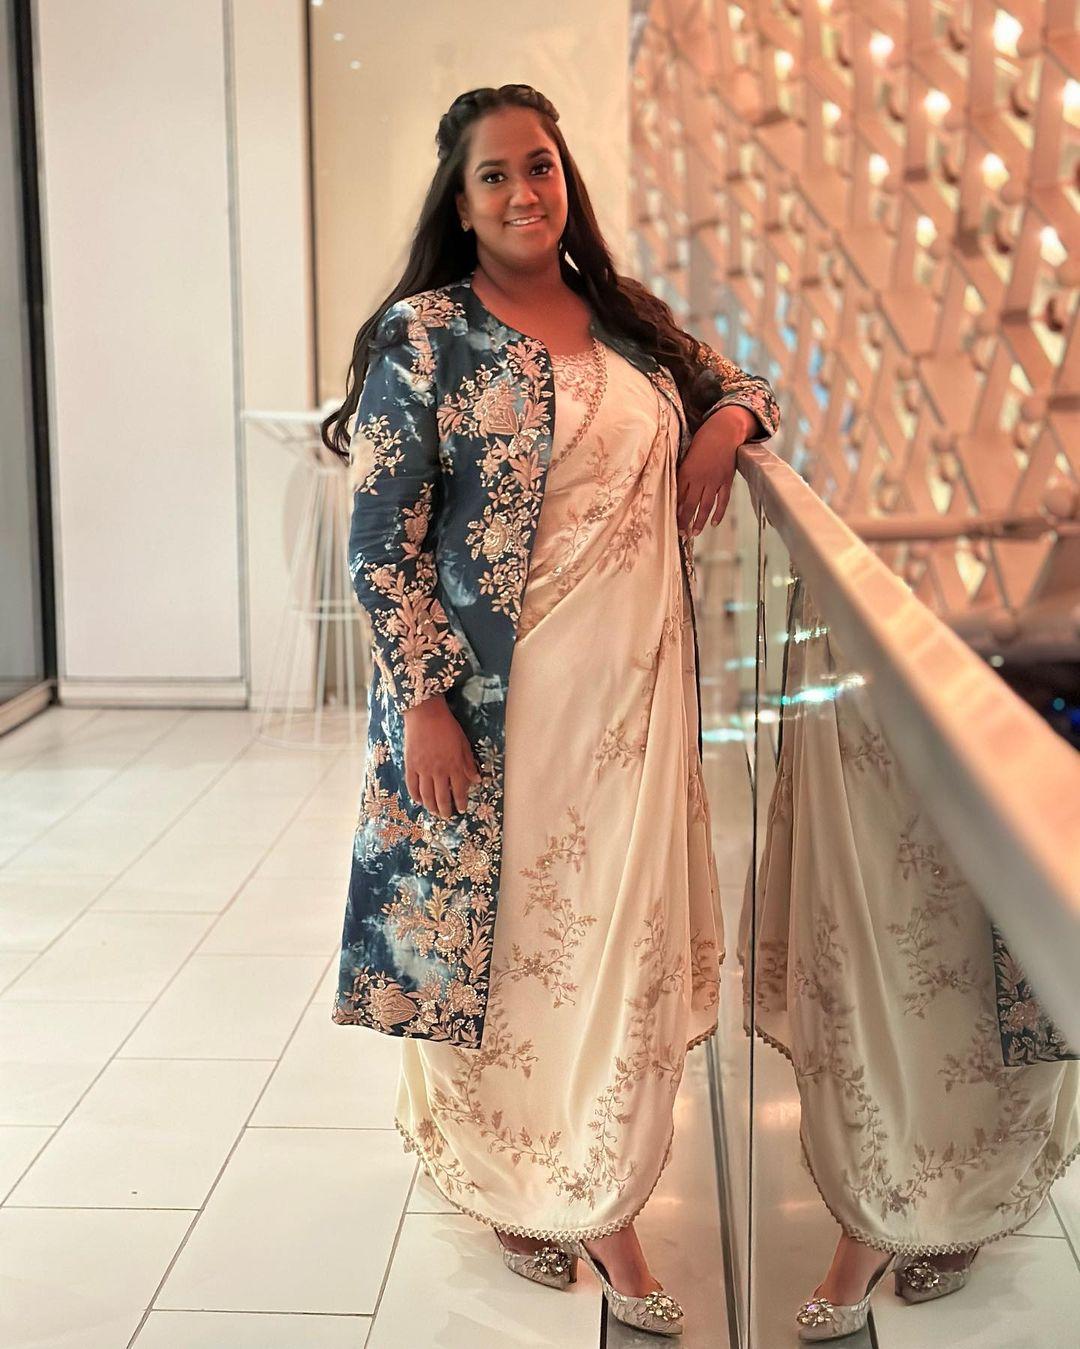 Arpita Khan: Salim Khan's adopted daughter, Arpita Khan, found love in actor Ayush Sharma, the grandson of Sukh Ram, a former Minister from Himachal Pradesh. The couple has two children - Ahil and Ayat. Ayush made his Bollywood debut in the film 